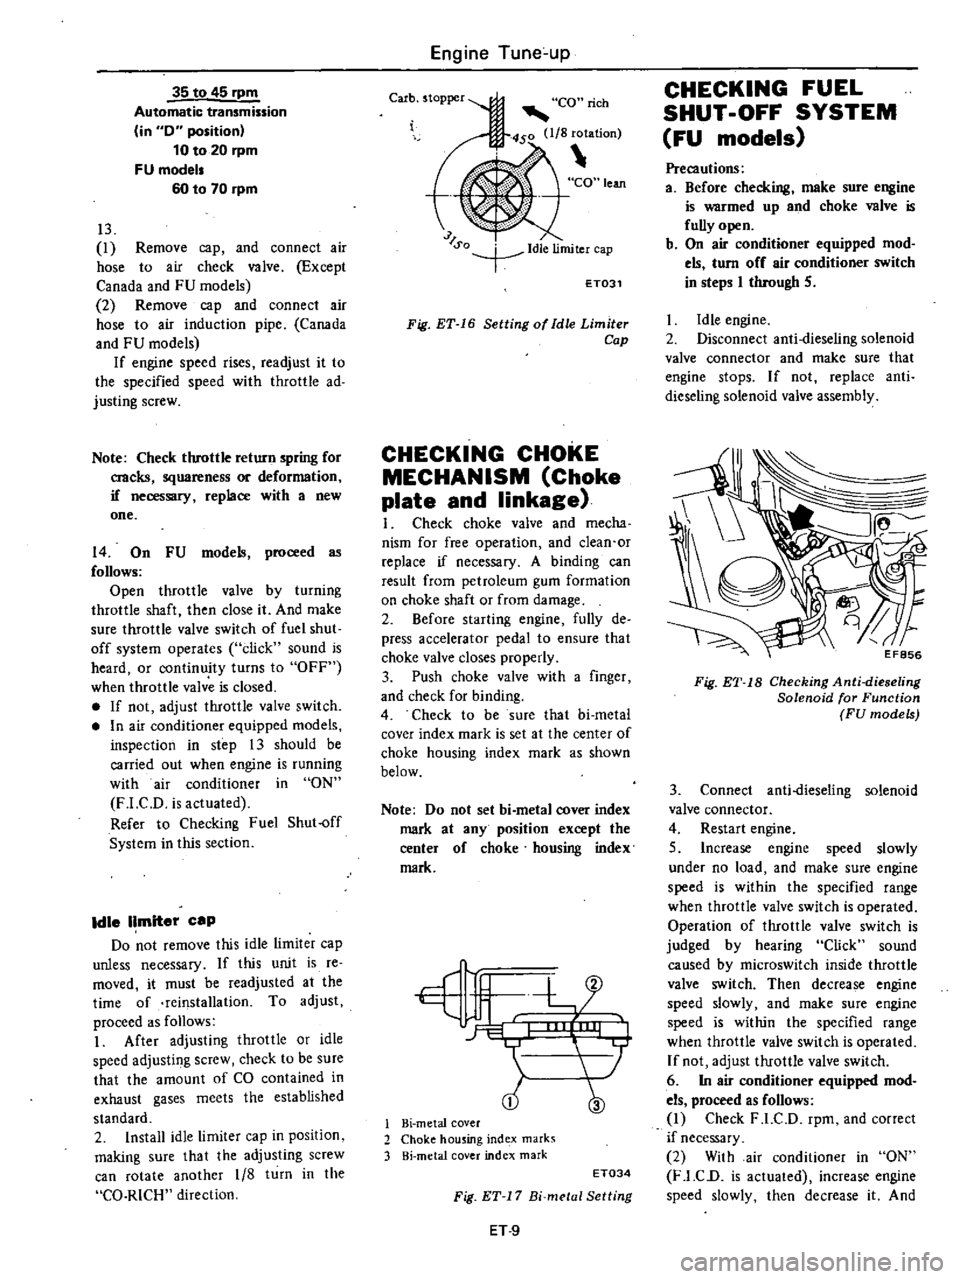 DATSUN 210 1979 Owners Manual 
35 
to 
45

pm

Automatic 
transmission

in 
60

position

10 
to 
20

pm

FU 
model

60 
to 
70

rpm

13

I 
Remove

cap 
and 
connect 
air

hose 
to 
air 
check 
valve

Except

Canada 
and 
FU 
mod